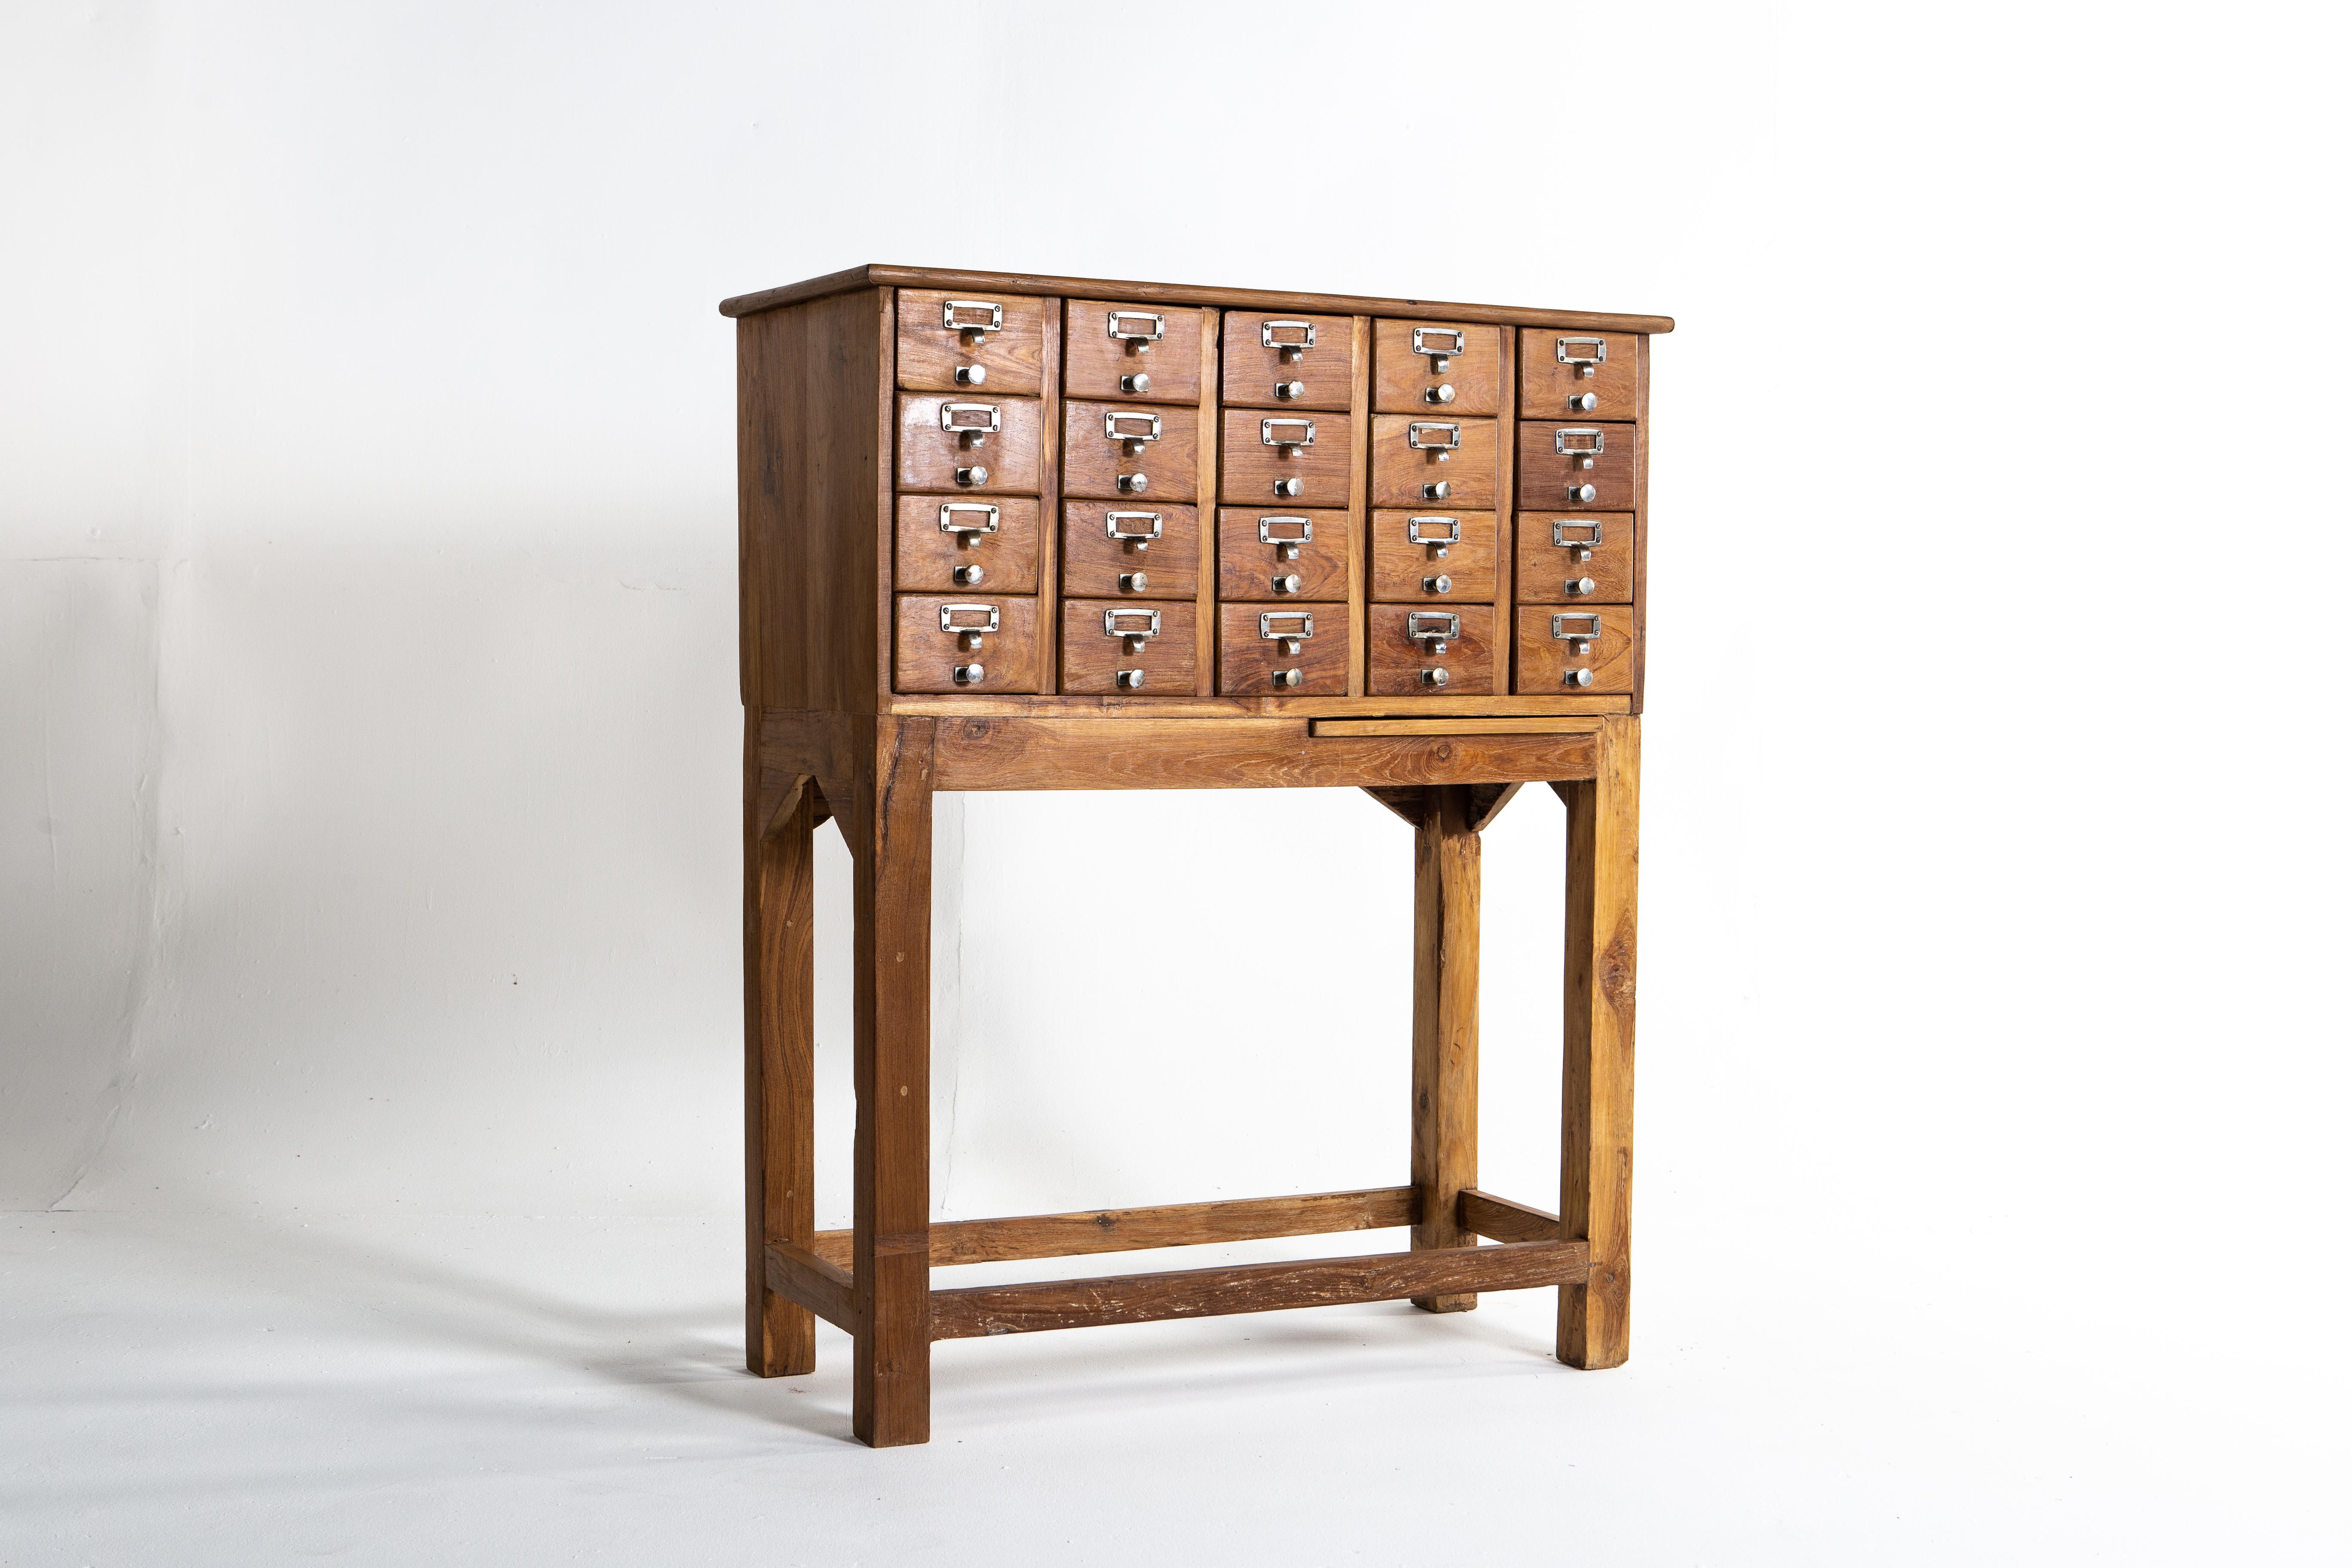 Chinese Chest on Stand with 20 Drawers